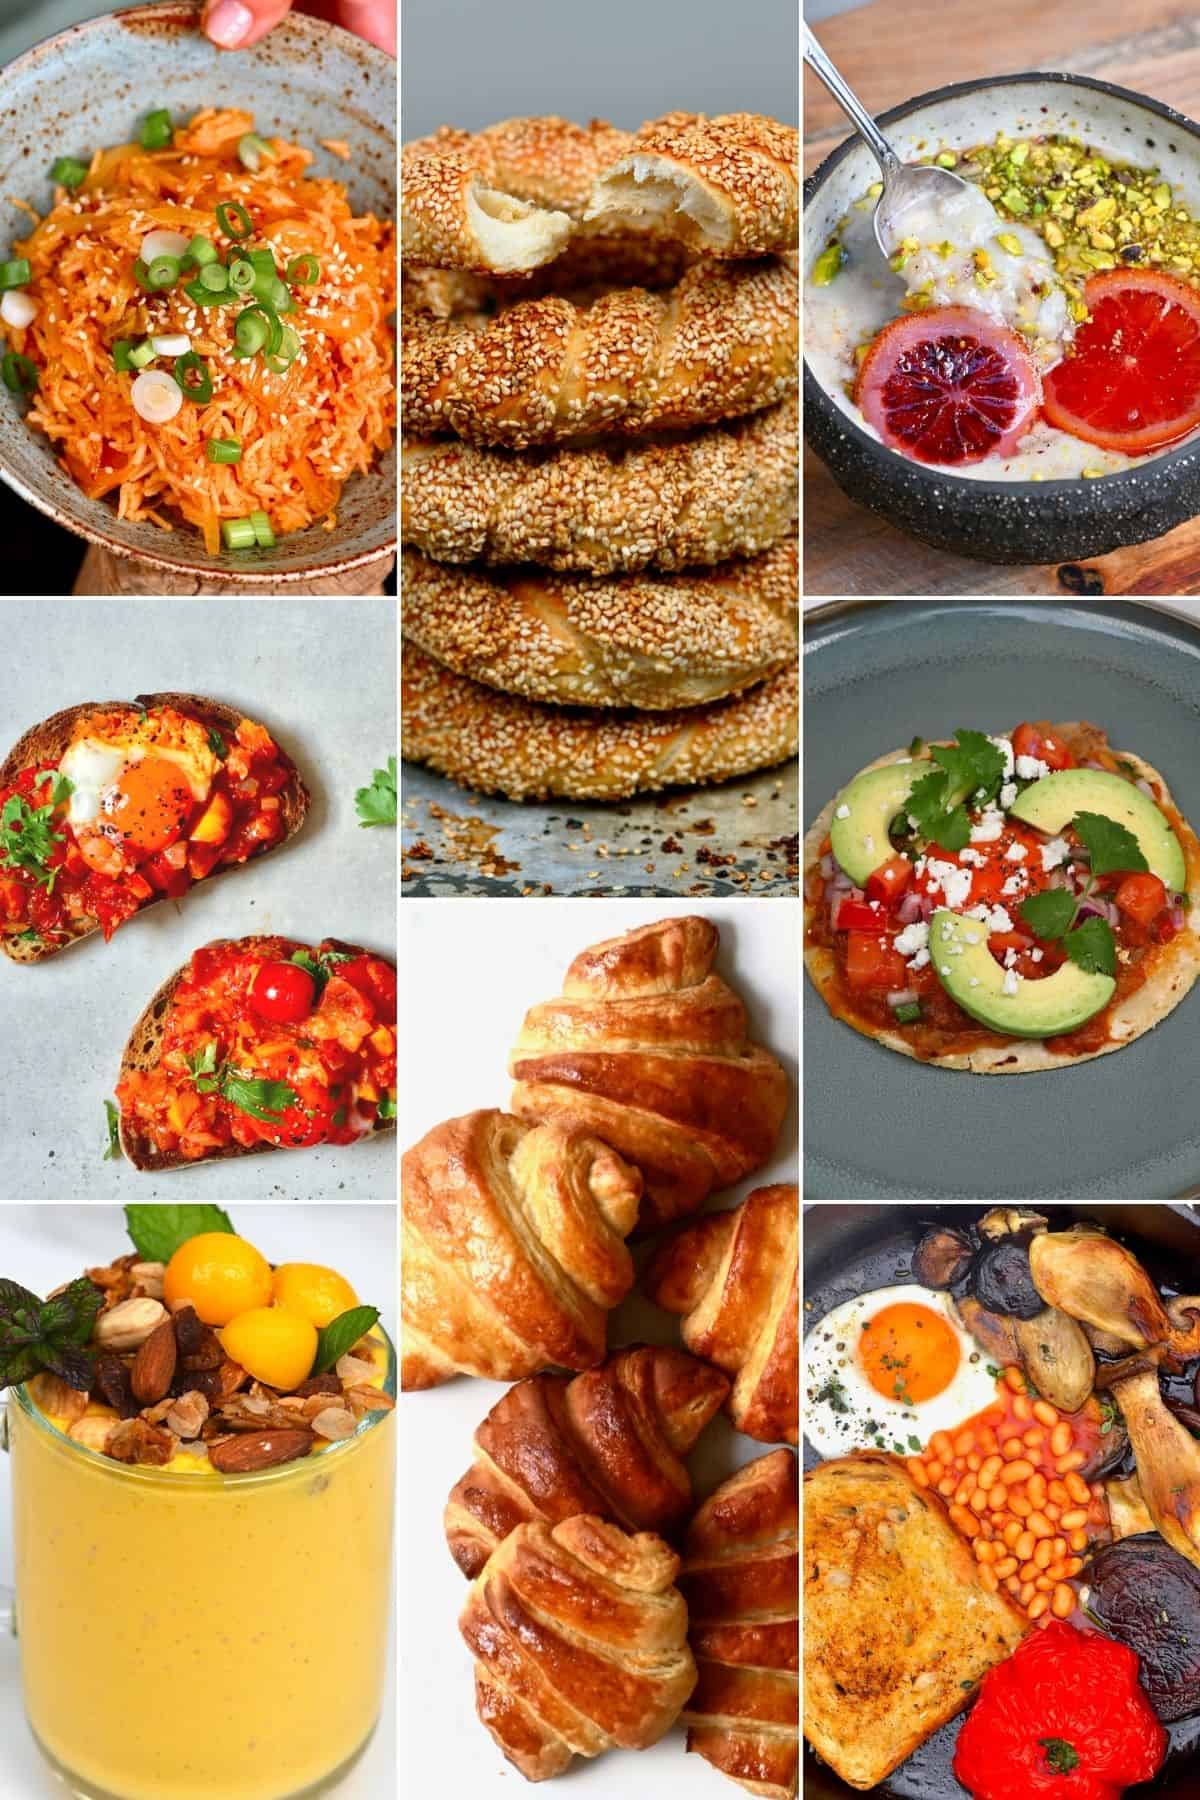 https://www.alphafoodie.com/wp-content/uploads/2022/02/Breakfasts-From-Around-The-World-Main1.jpeg